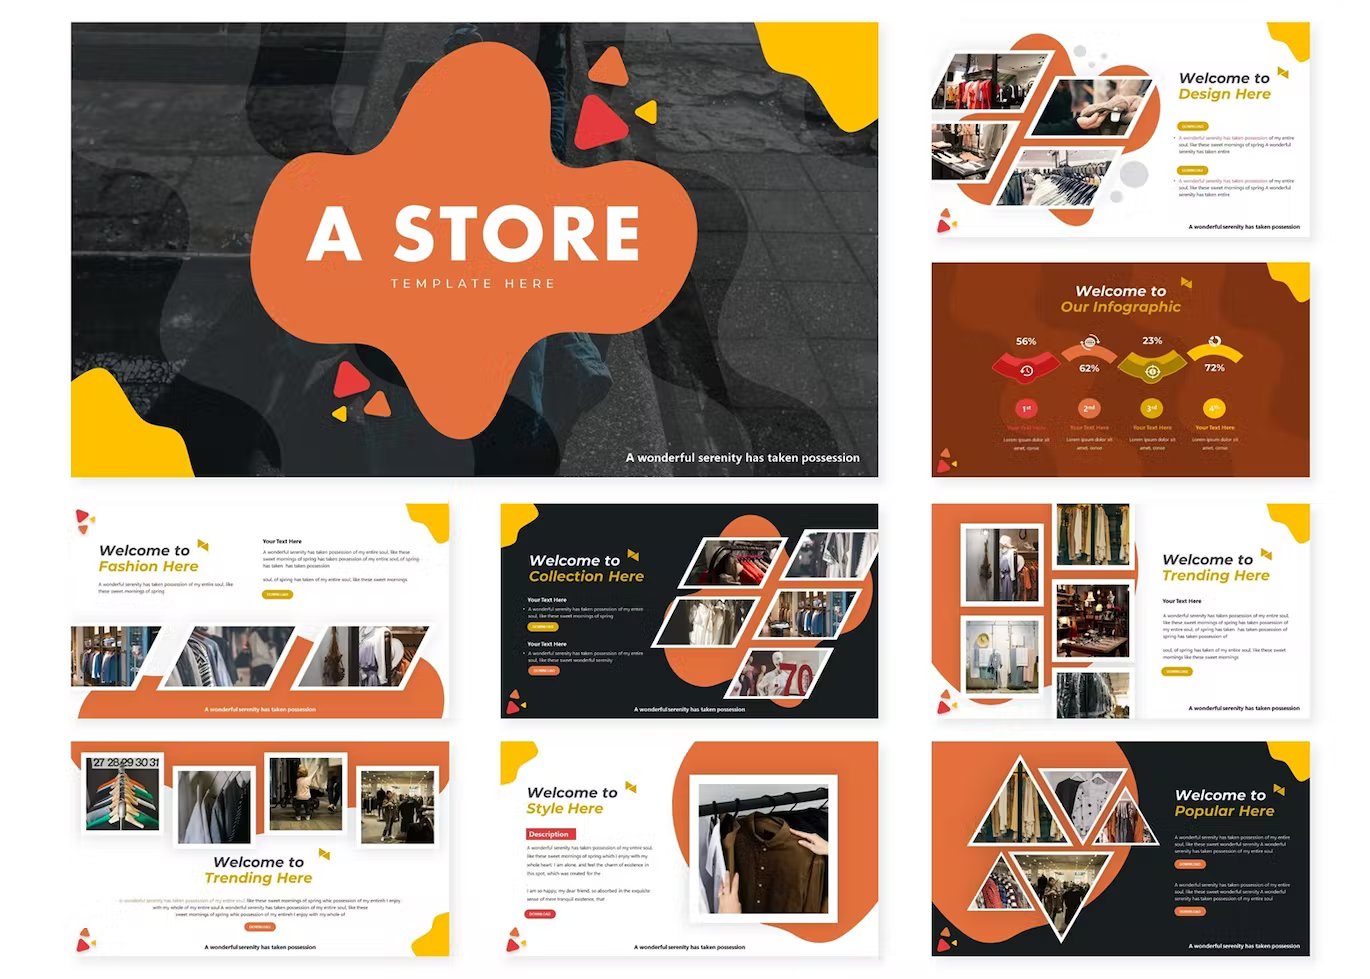 A set of 9 different shop google slides templates in red, orange, yellow, white and dark gray on a white background.